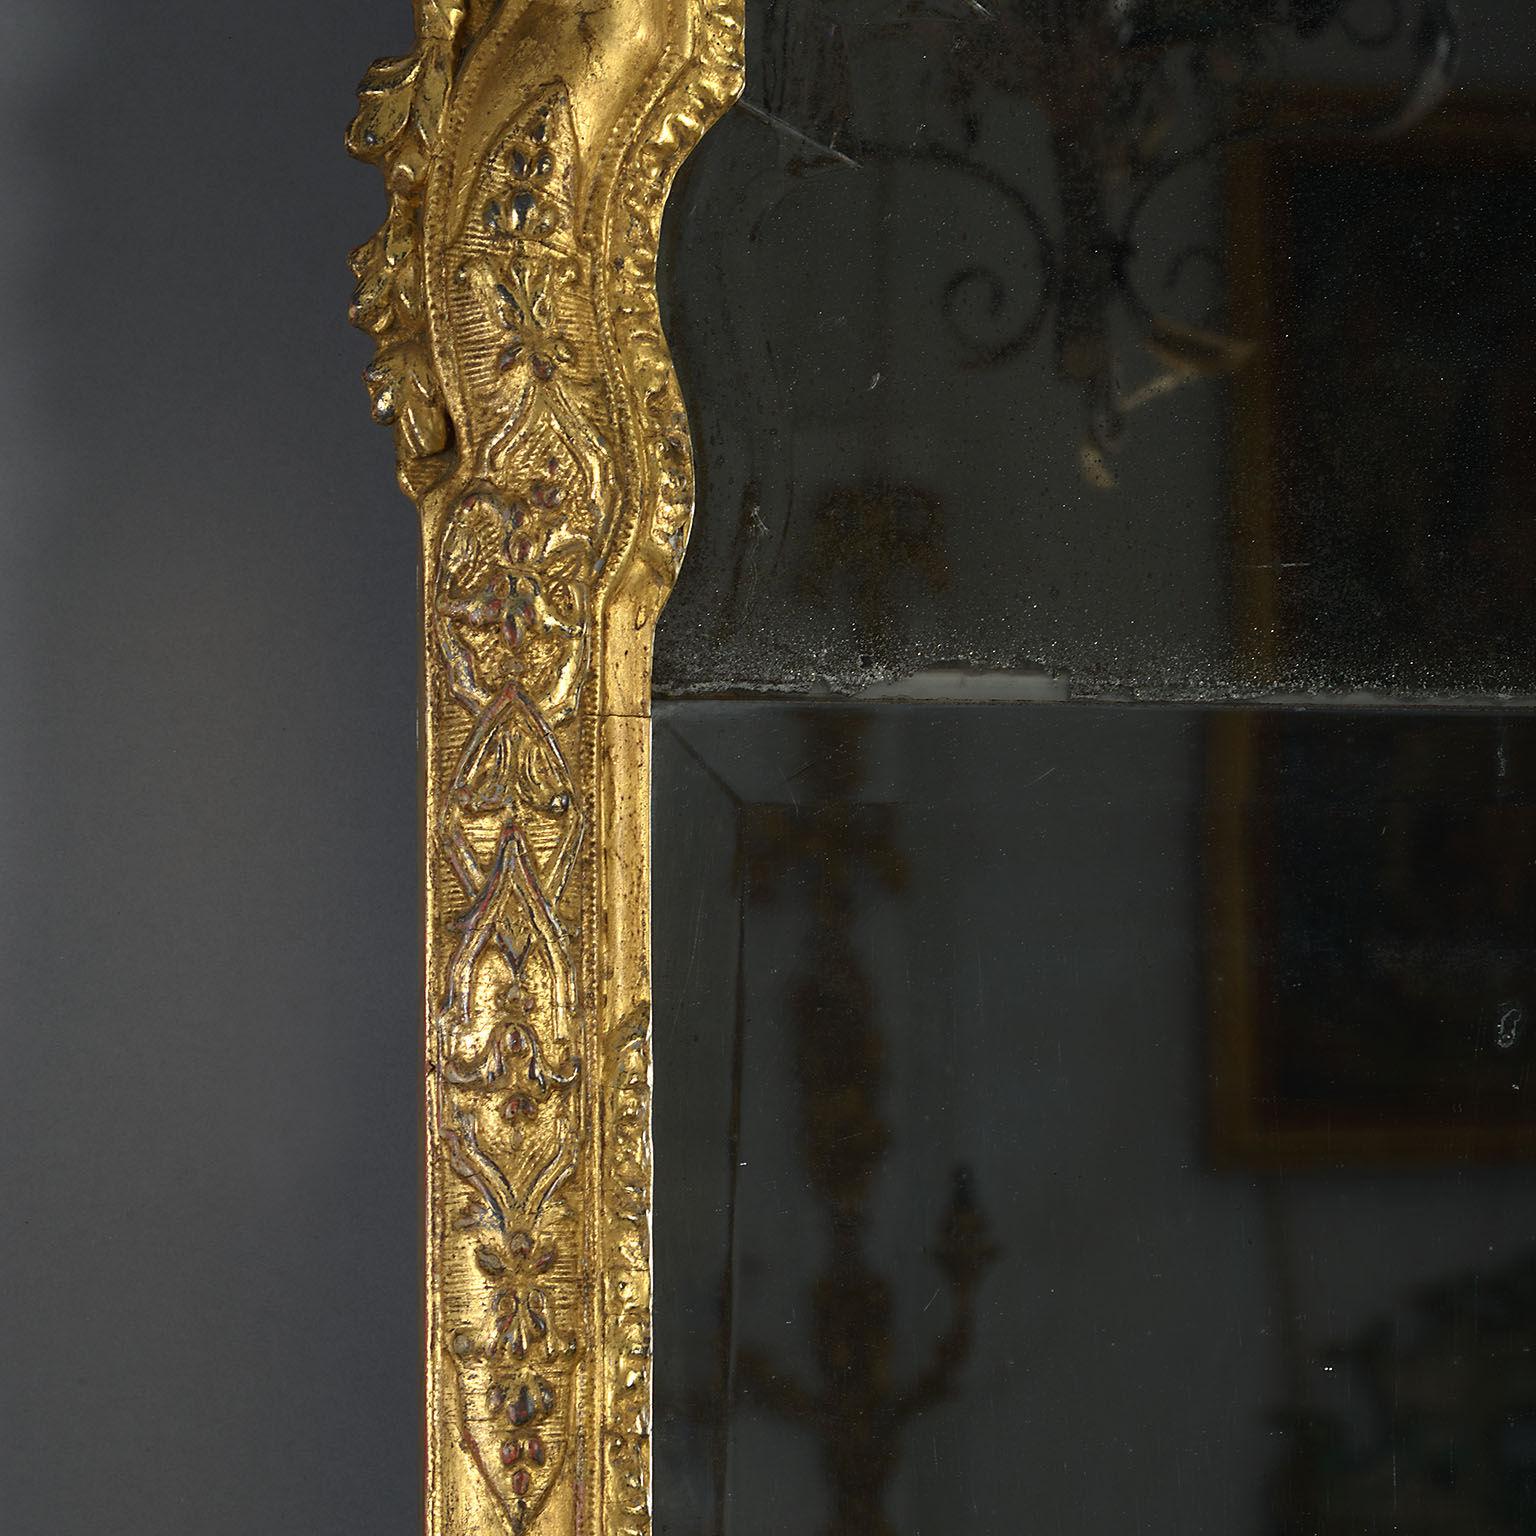 The original arched, divided plate with softly beveled edges contained within a molded frame carved with panels of strapwork, stylized foliage and scrollwork and with a lambrequin cresting.